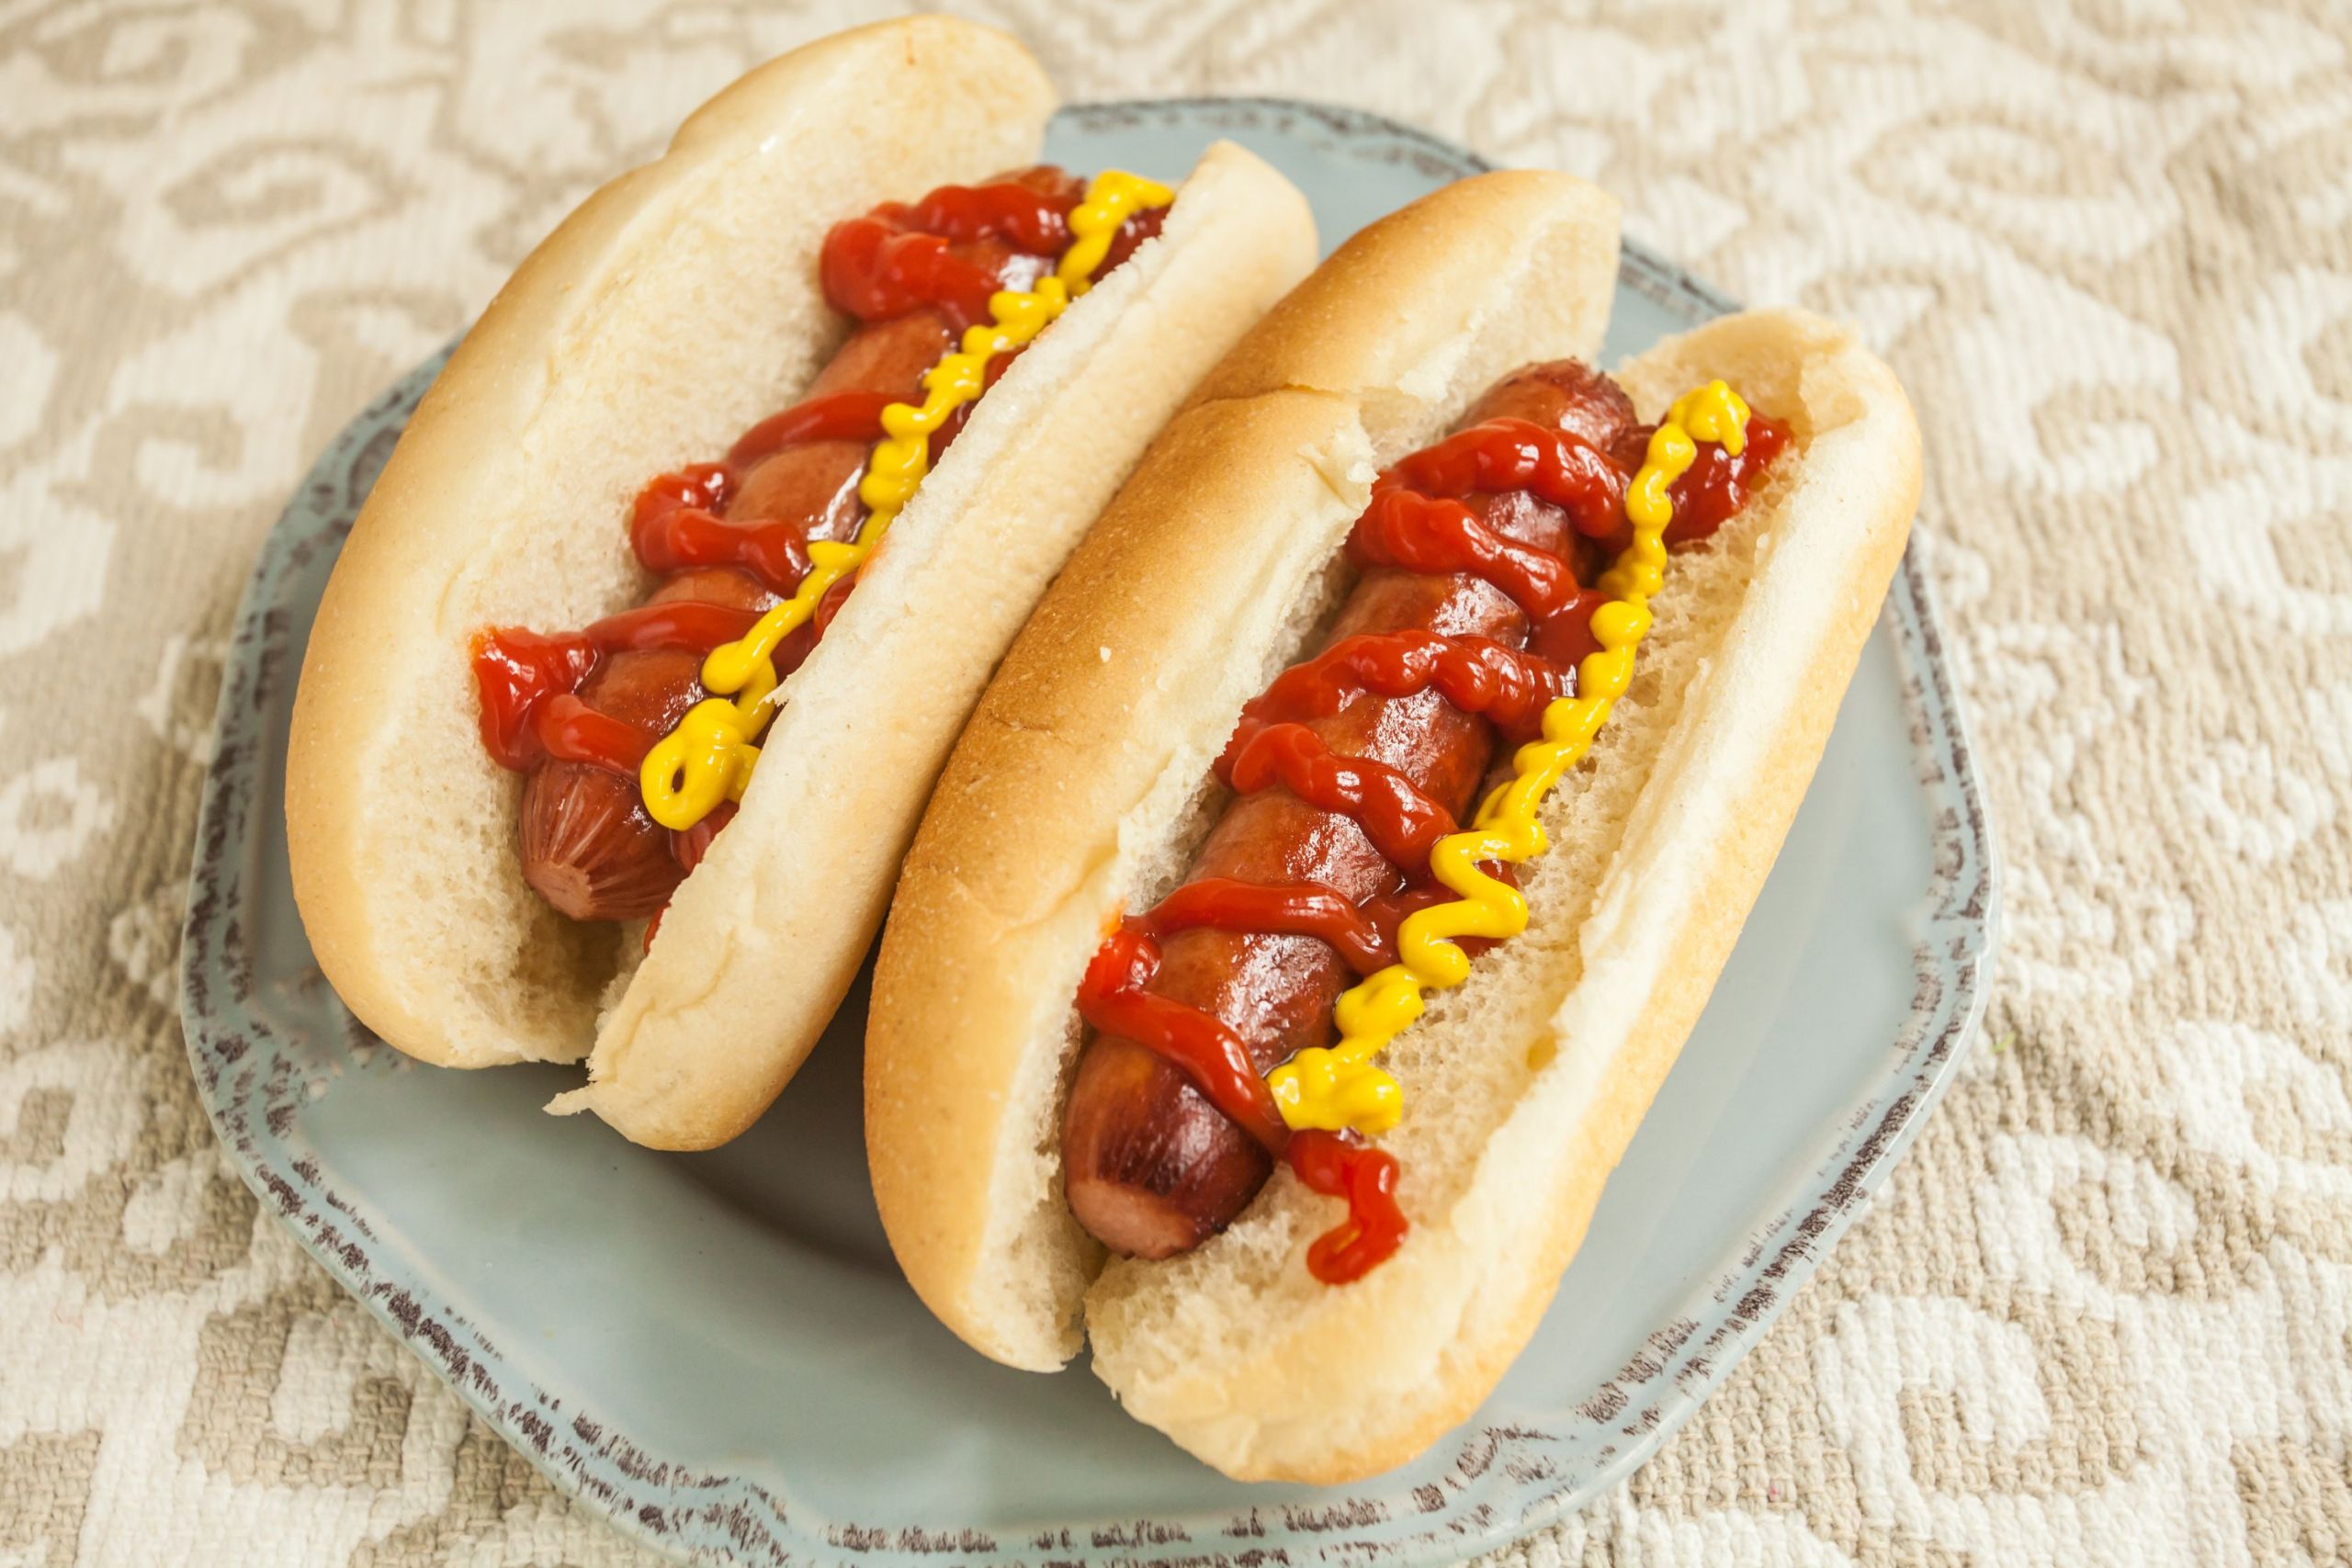 Best Way To Microwave Hot Dogs
 How to Cook Hot Dogs Six Different Ways with